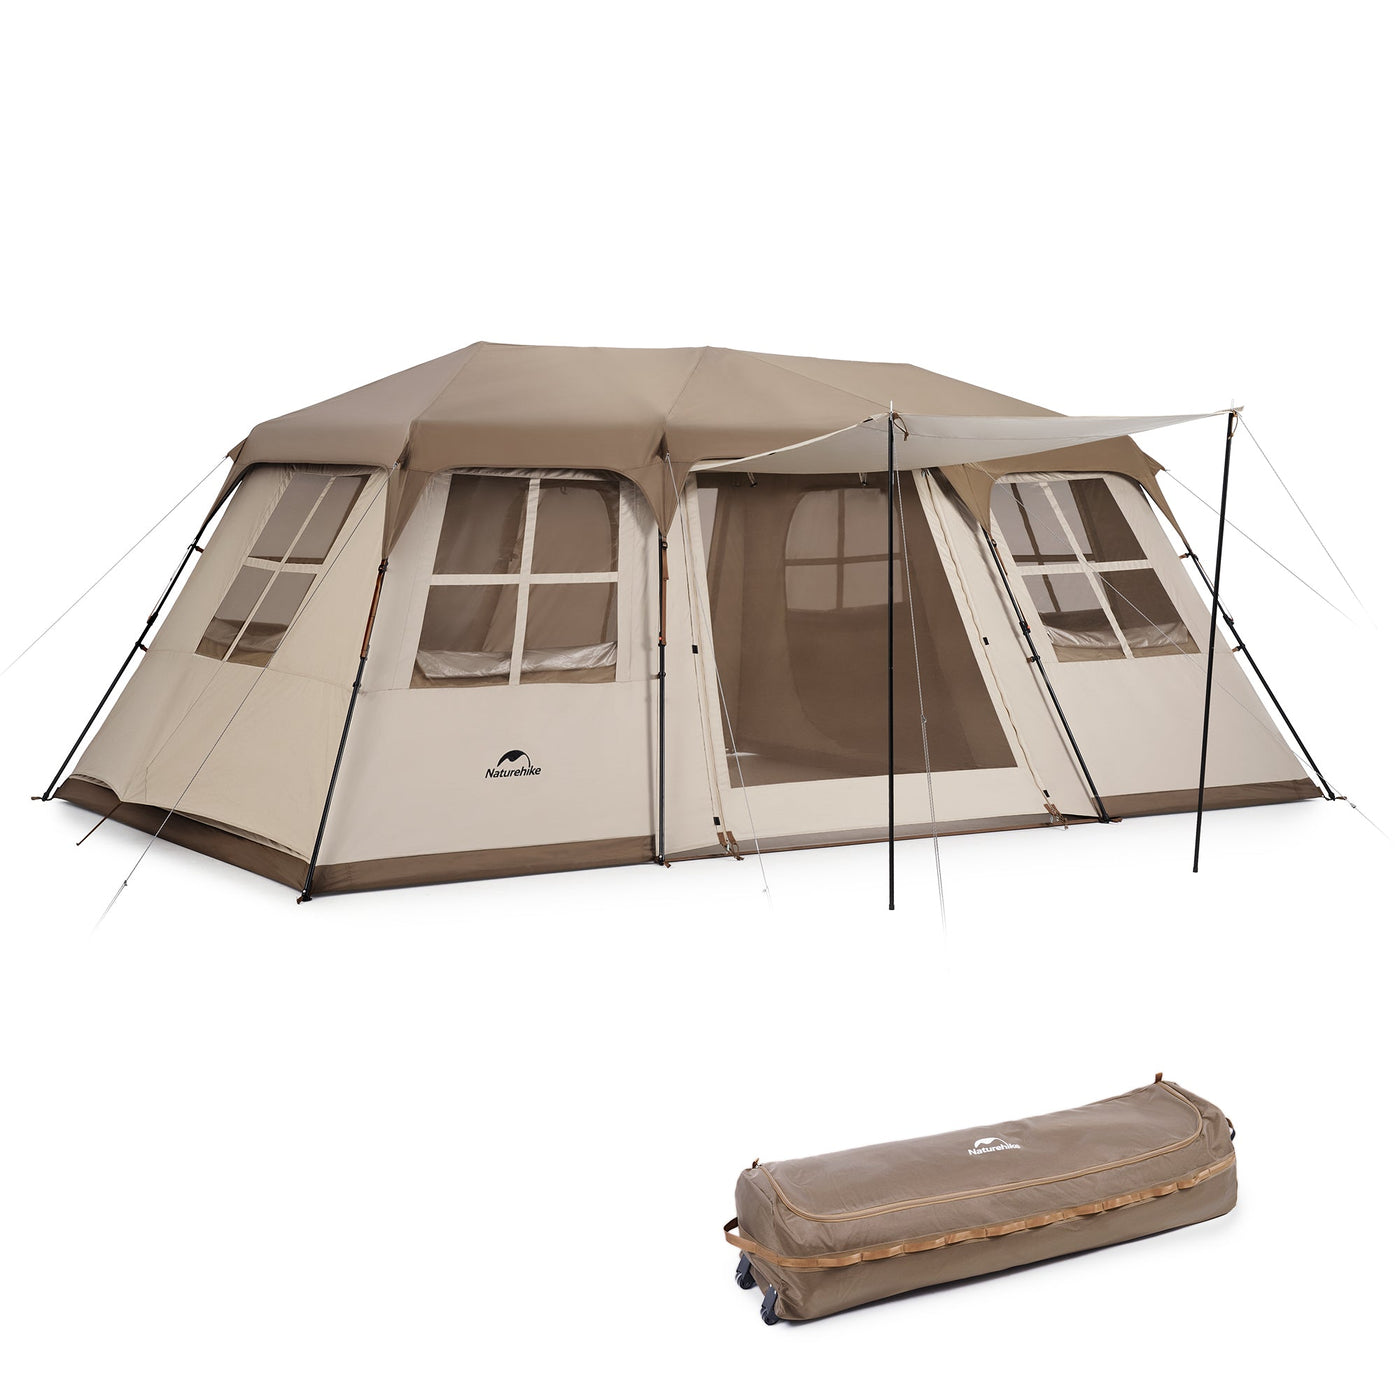 Village 17-Roof Automatic Tent Two-Room&One-Hall